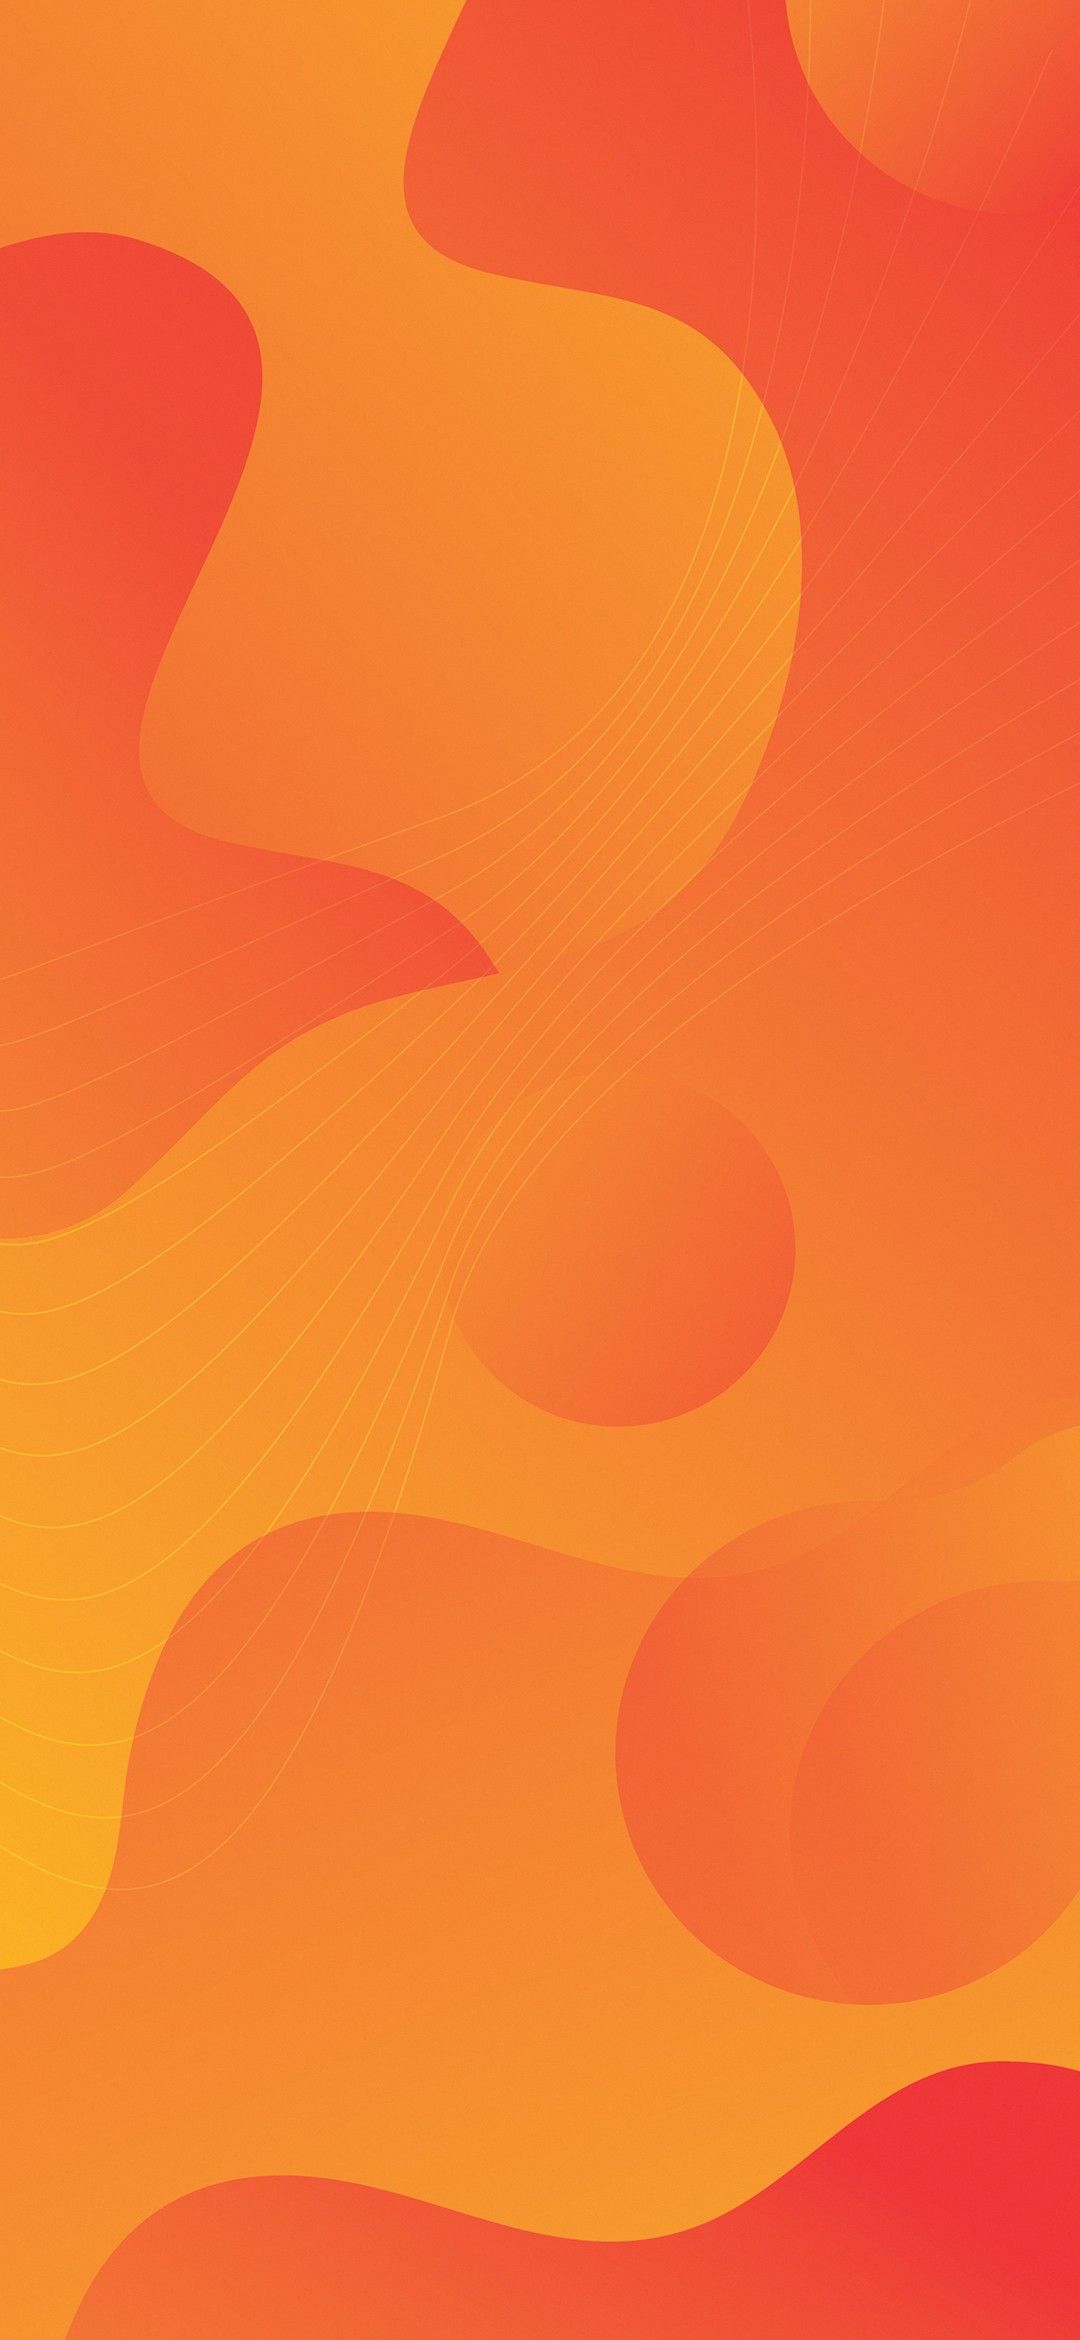 Miui 11 stock wallpaper. Abstract wallpaper background, Graphic wallpaper, Poster background design